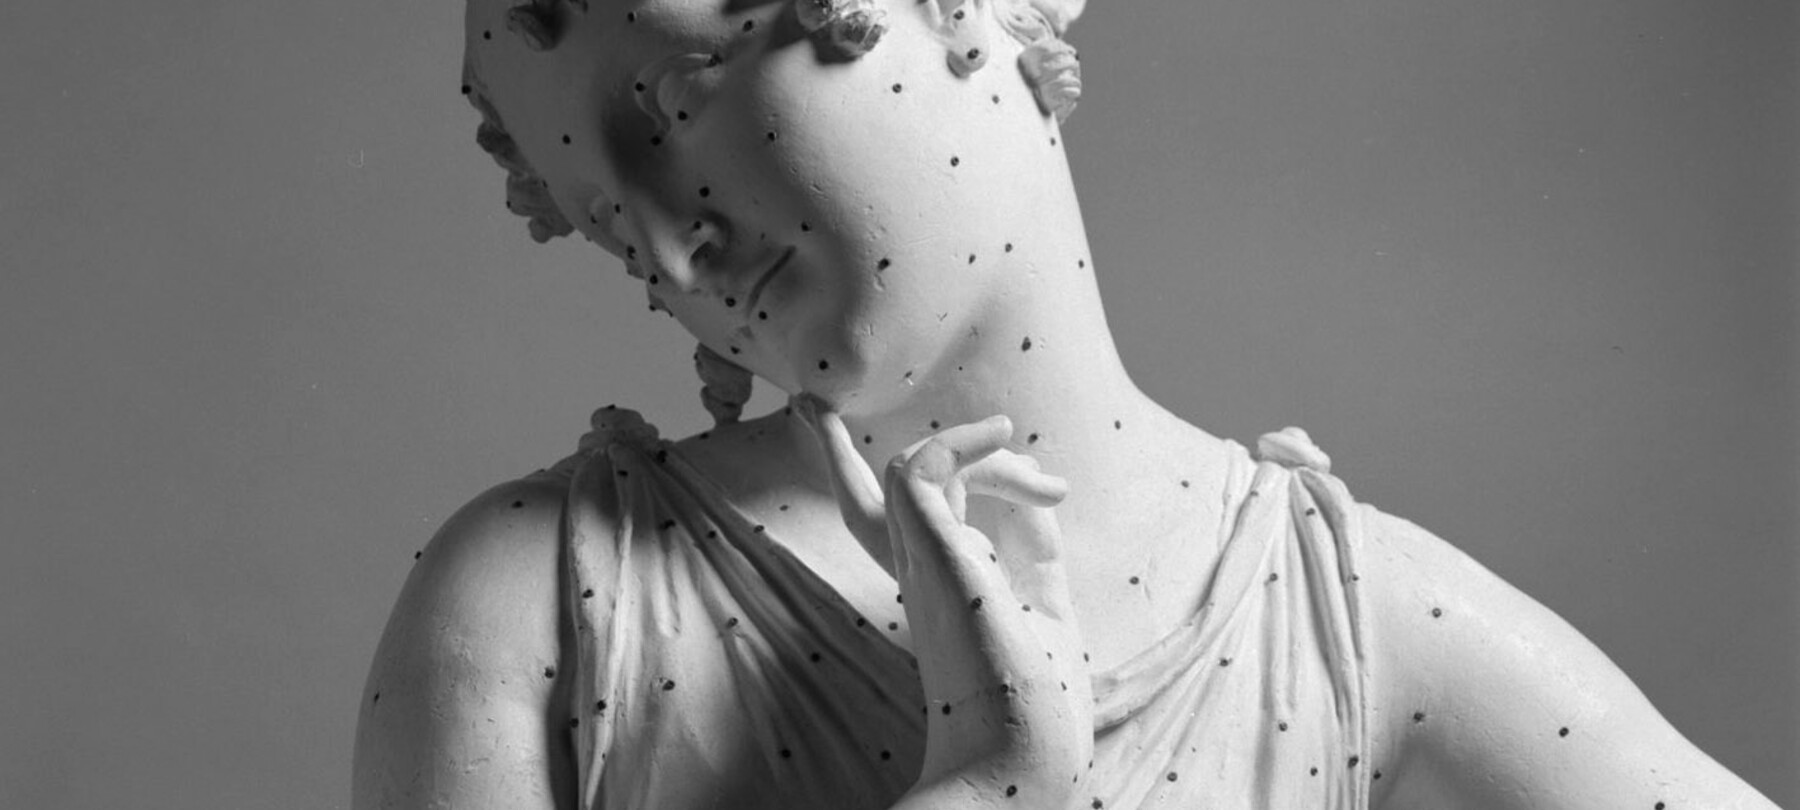 Canova’s exhibition at the Mart Museum, in Rovereto